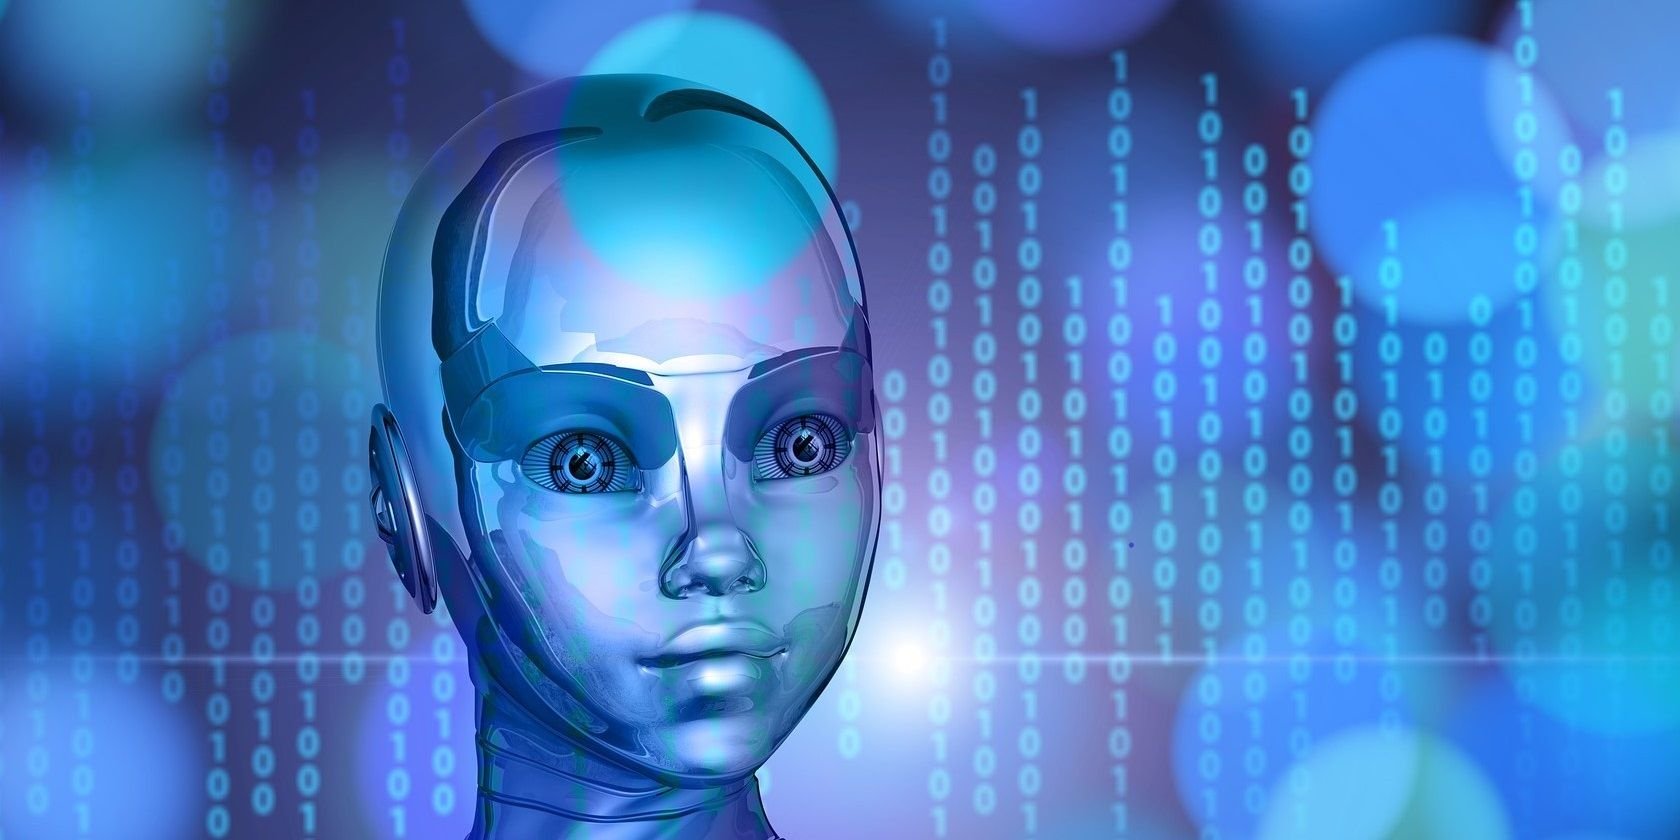 5 Common Myths About Artificial Intelligence That Aren't True